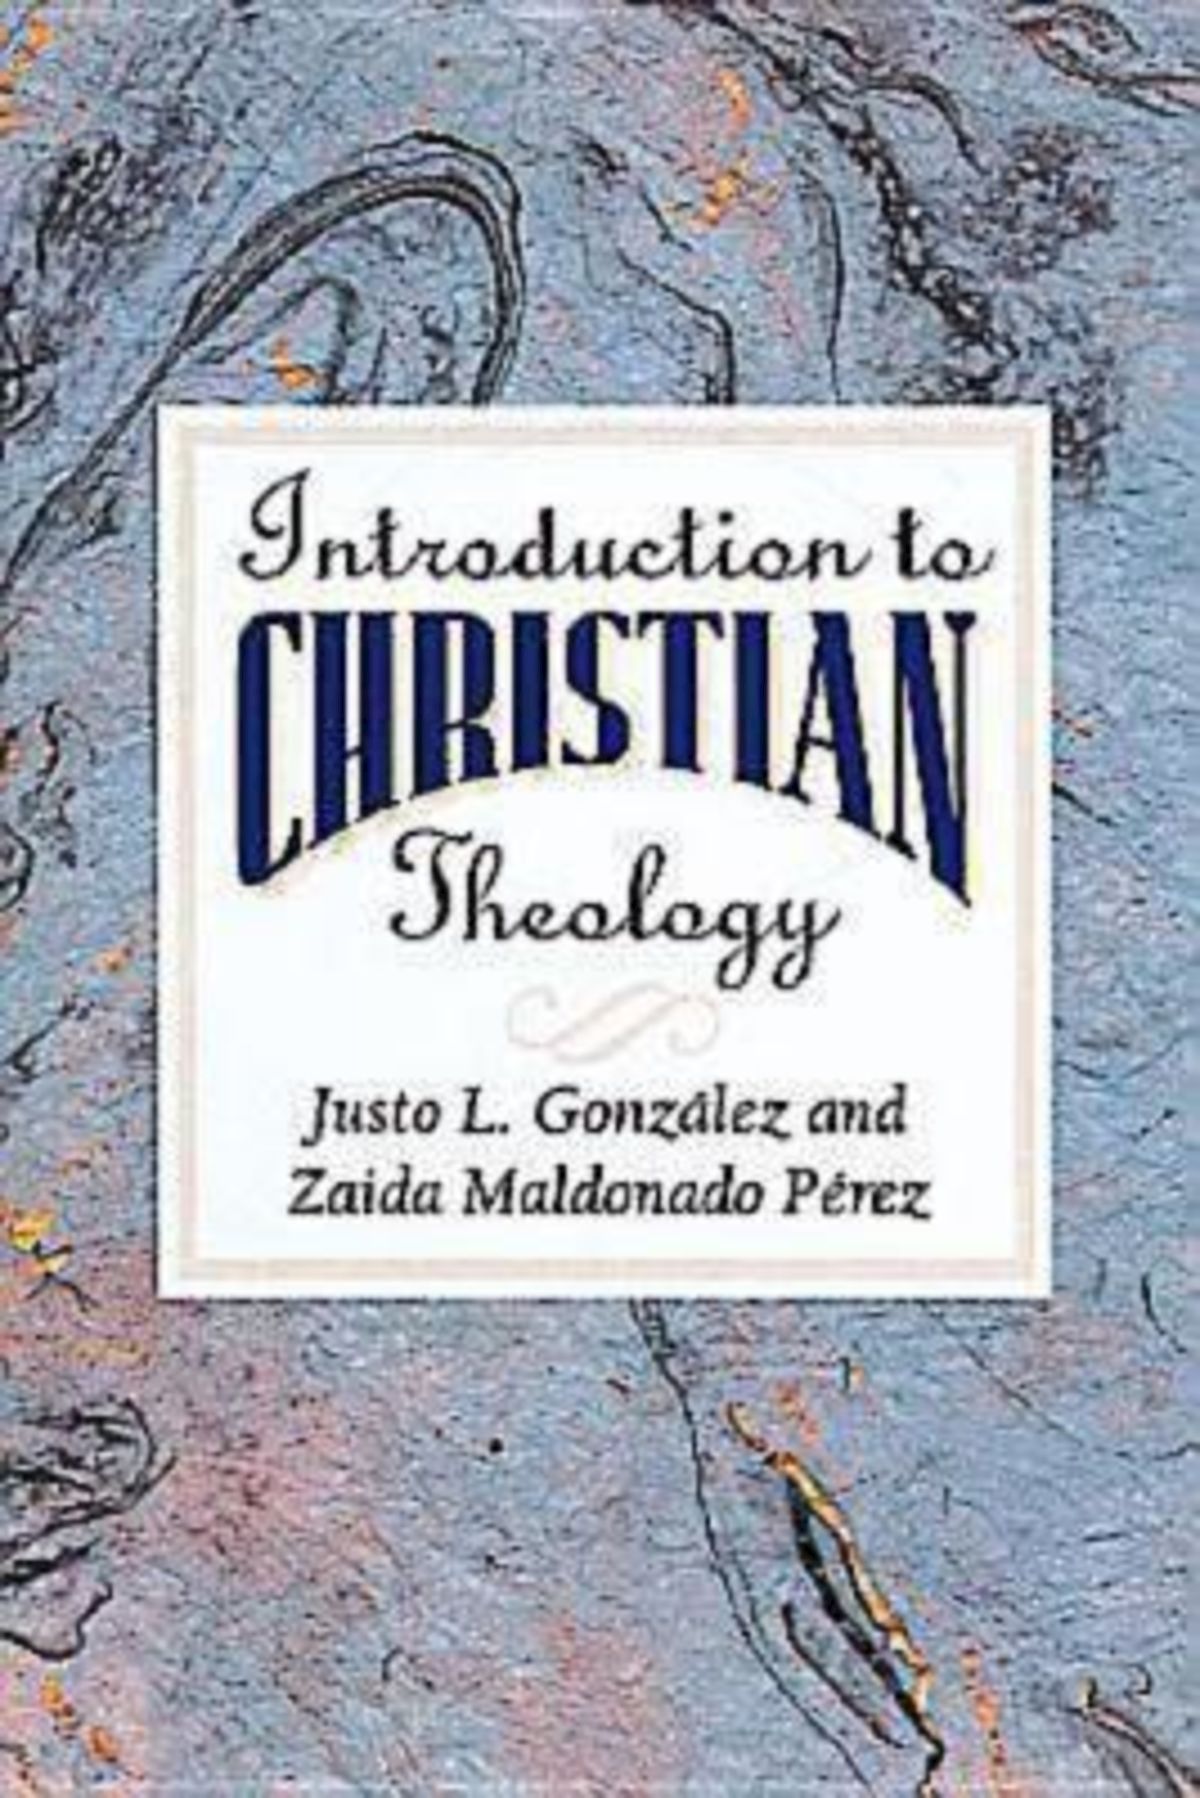 Introduction to Christian Theology - 15-24.99